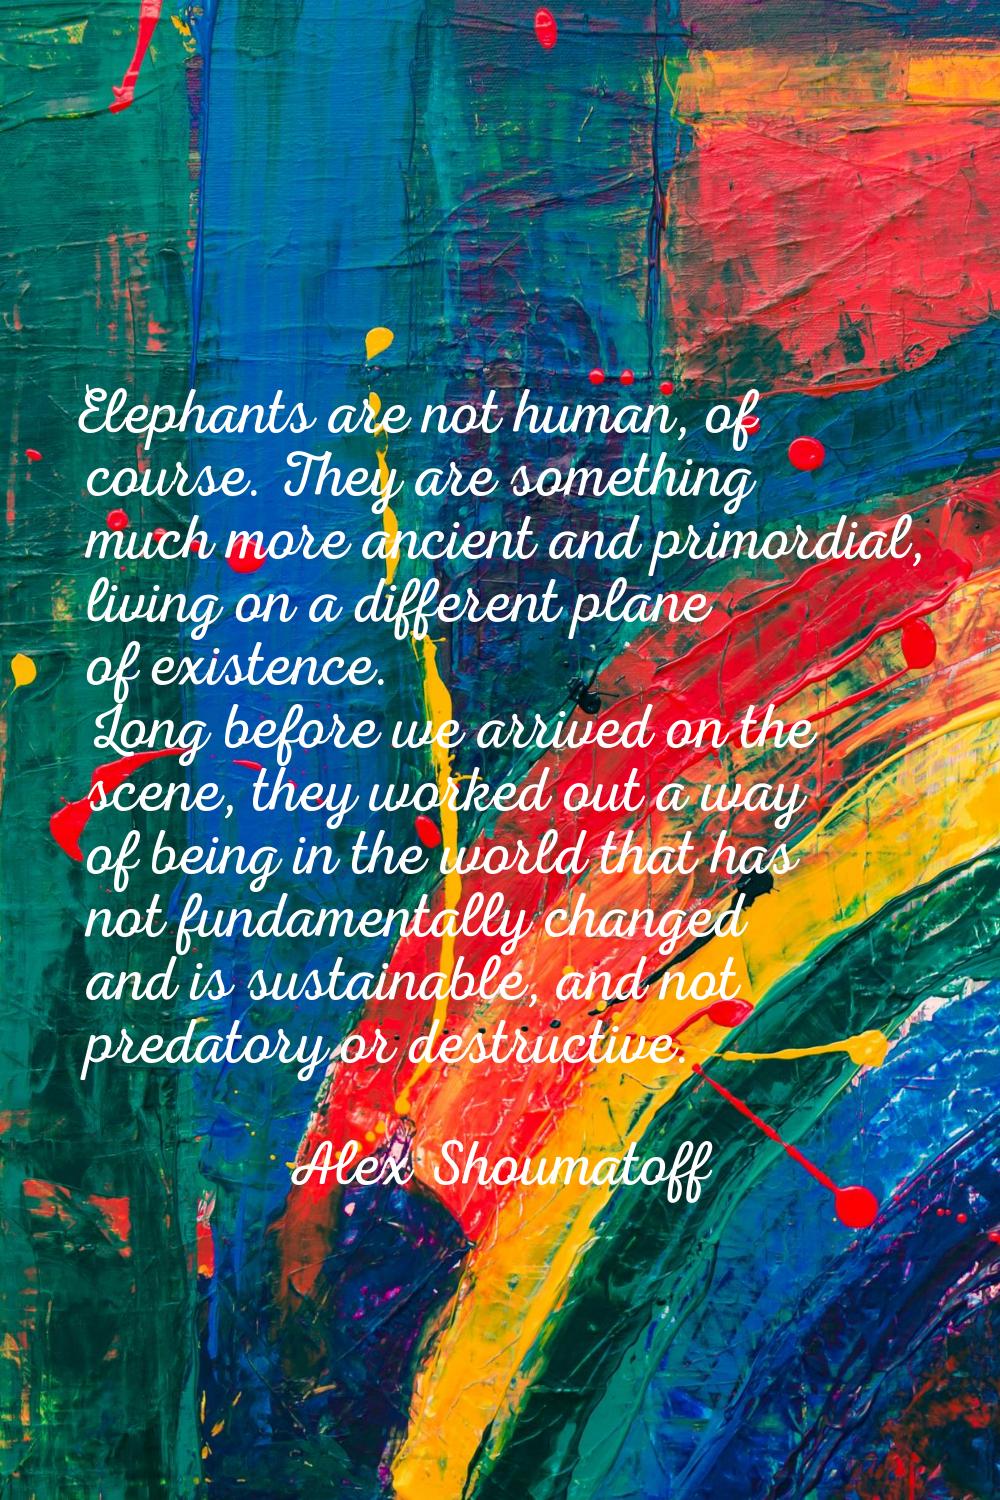 Elephants are not human, of course. They are something much more ancient and primordial, living on 